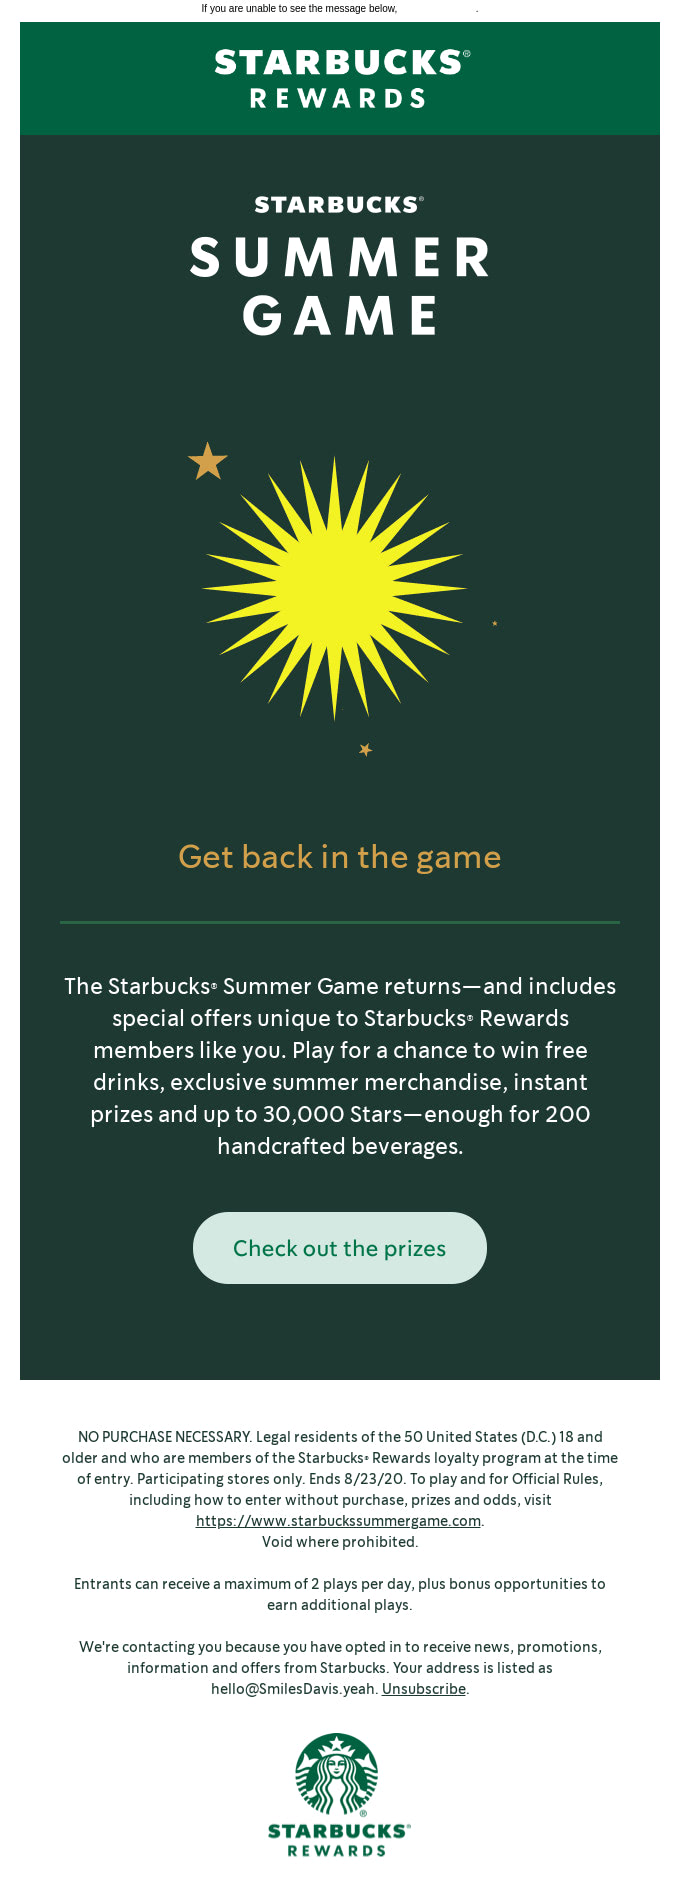 Email from Starbucks